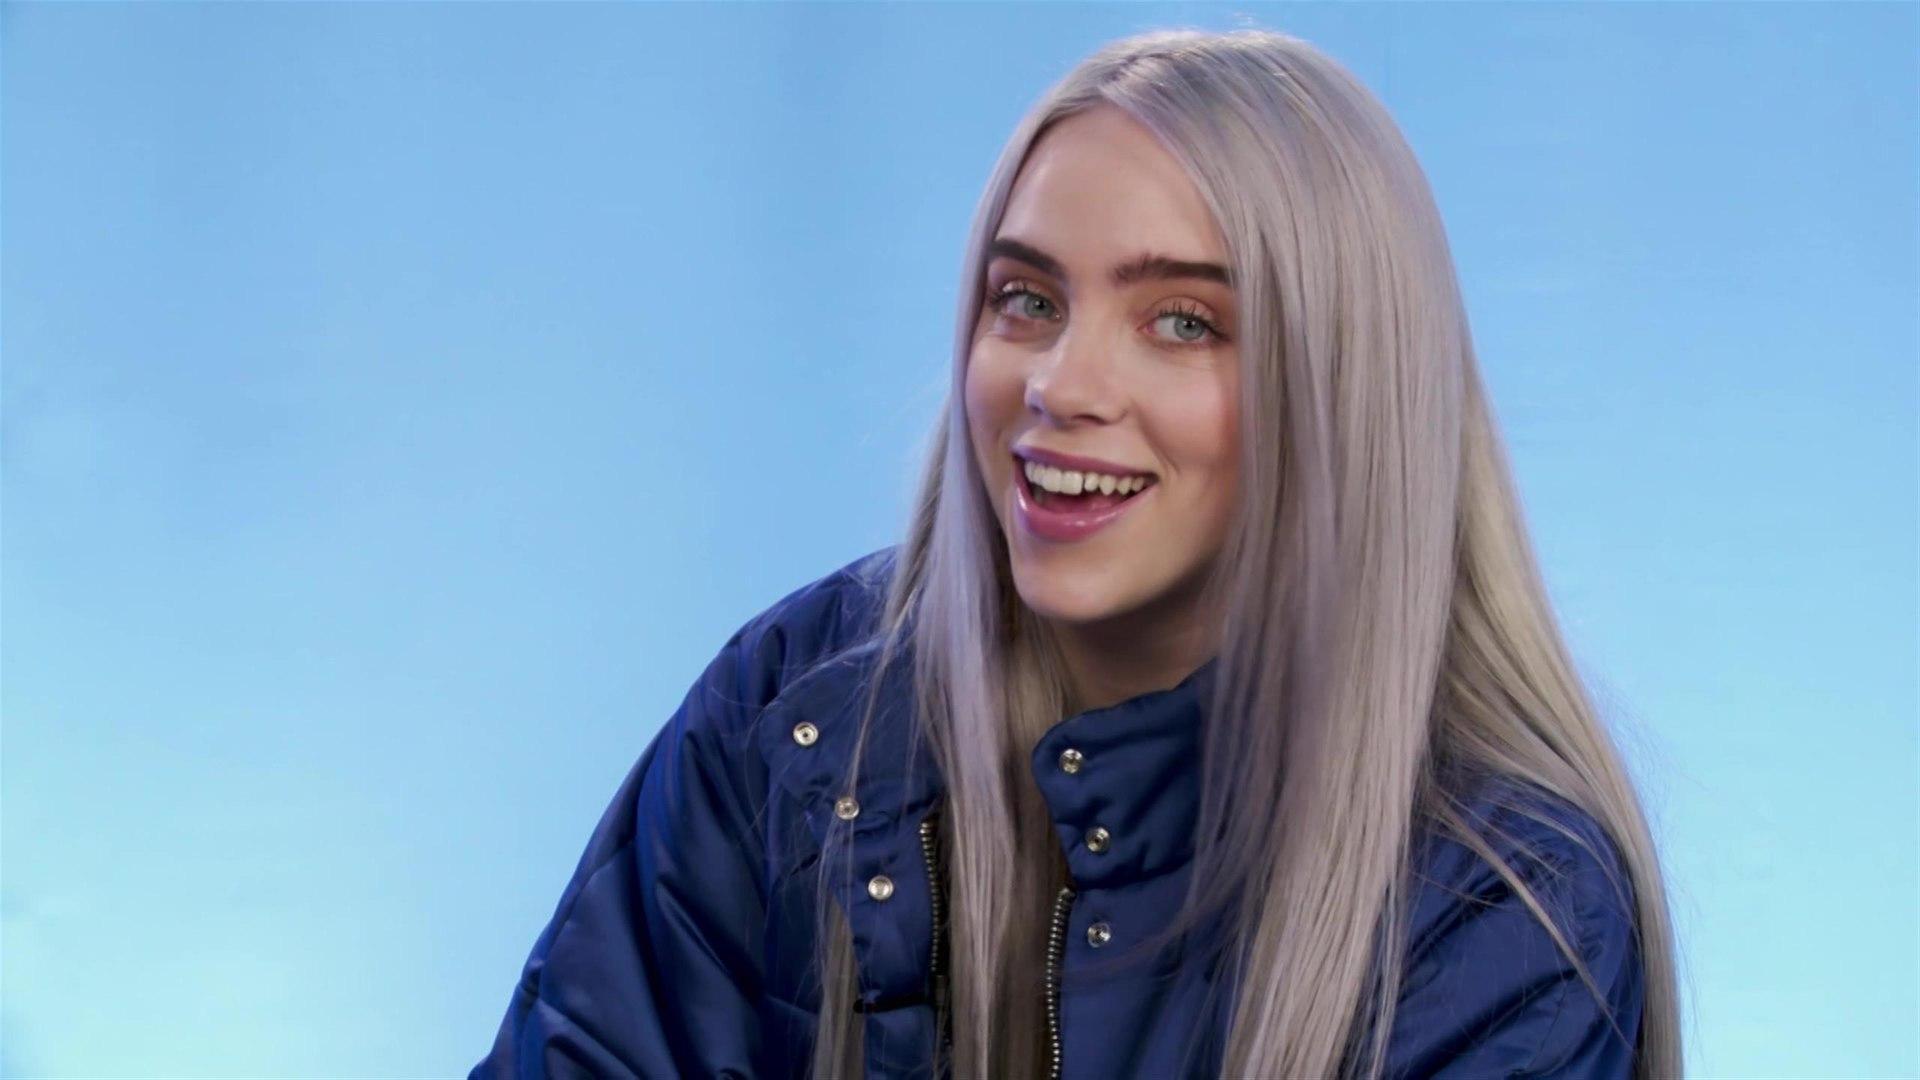 Billie Eilish Talks Don't Smile at Me EP, Hopes to Work With Tyler, The Creator